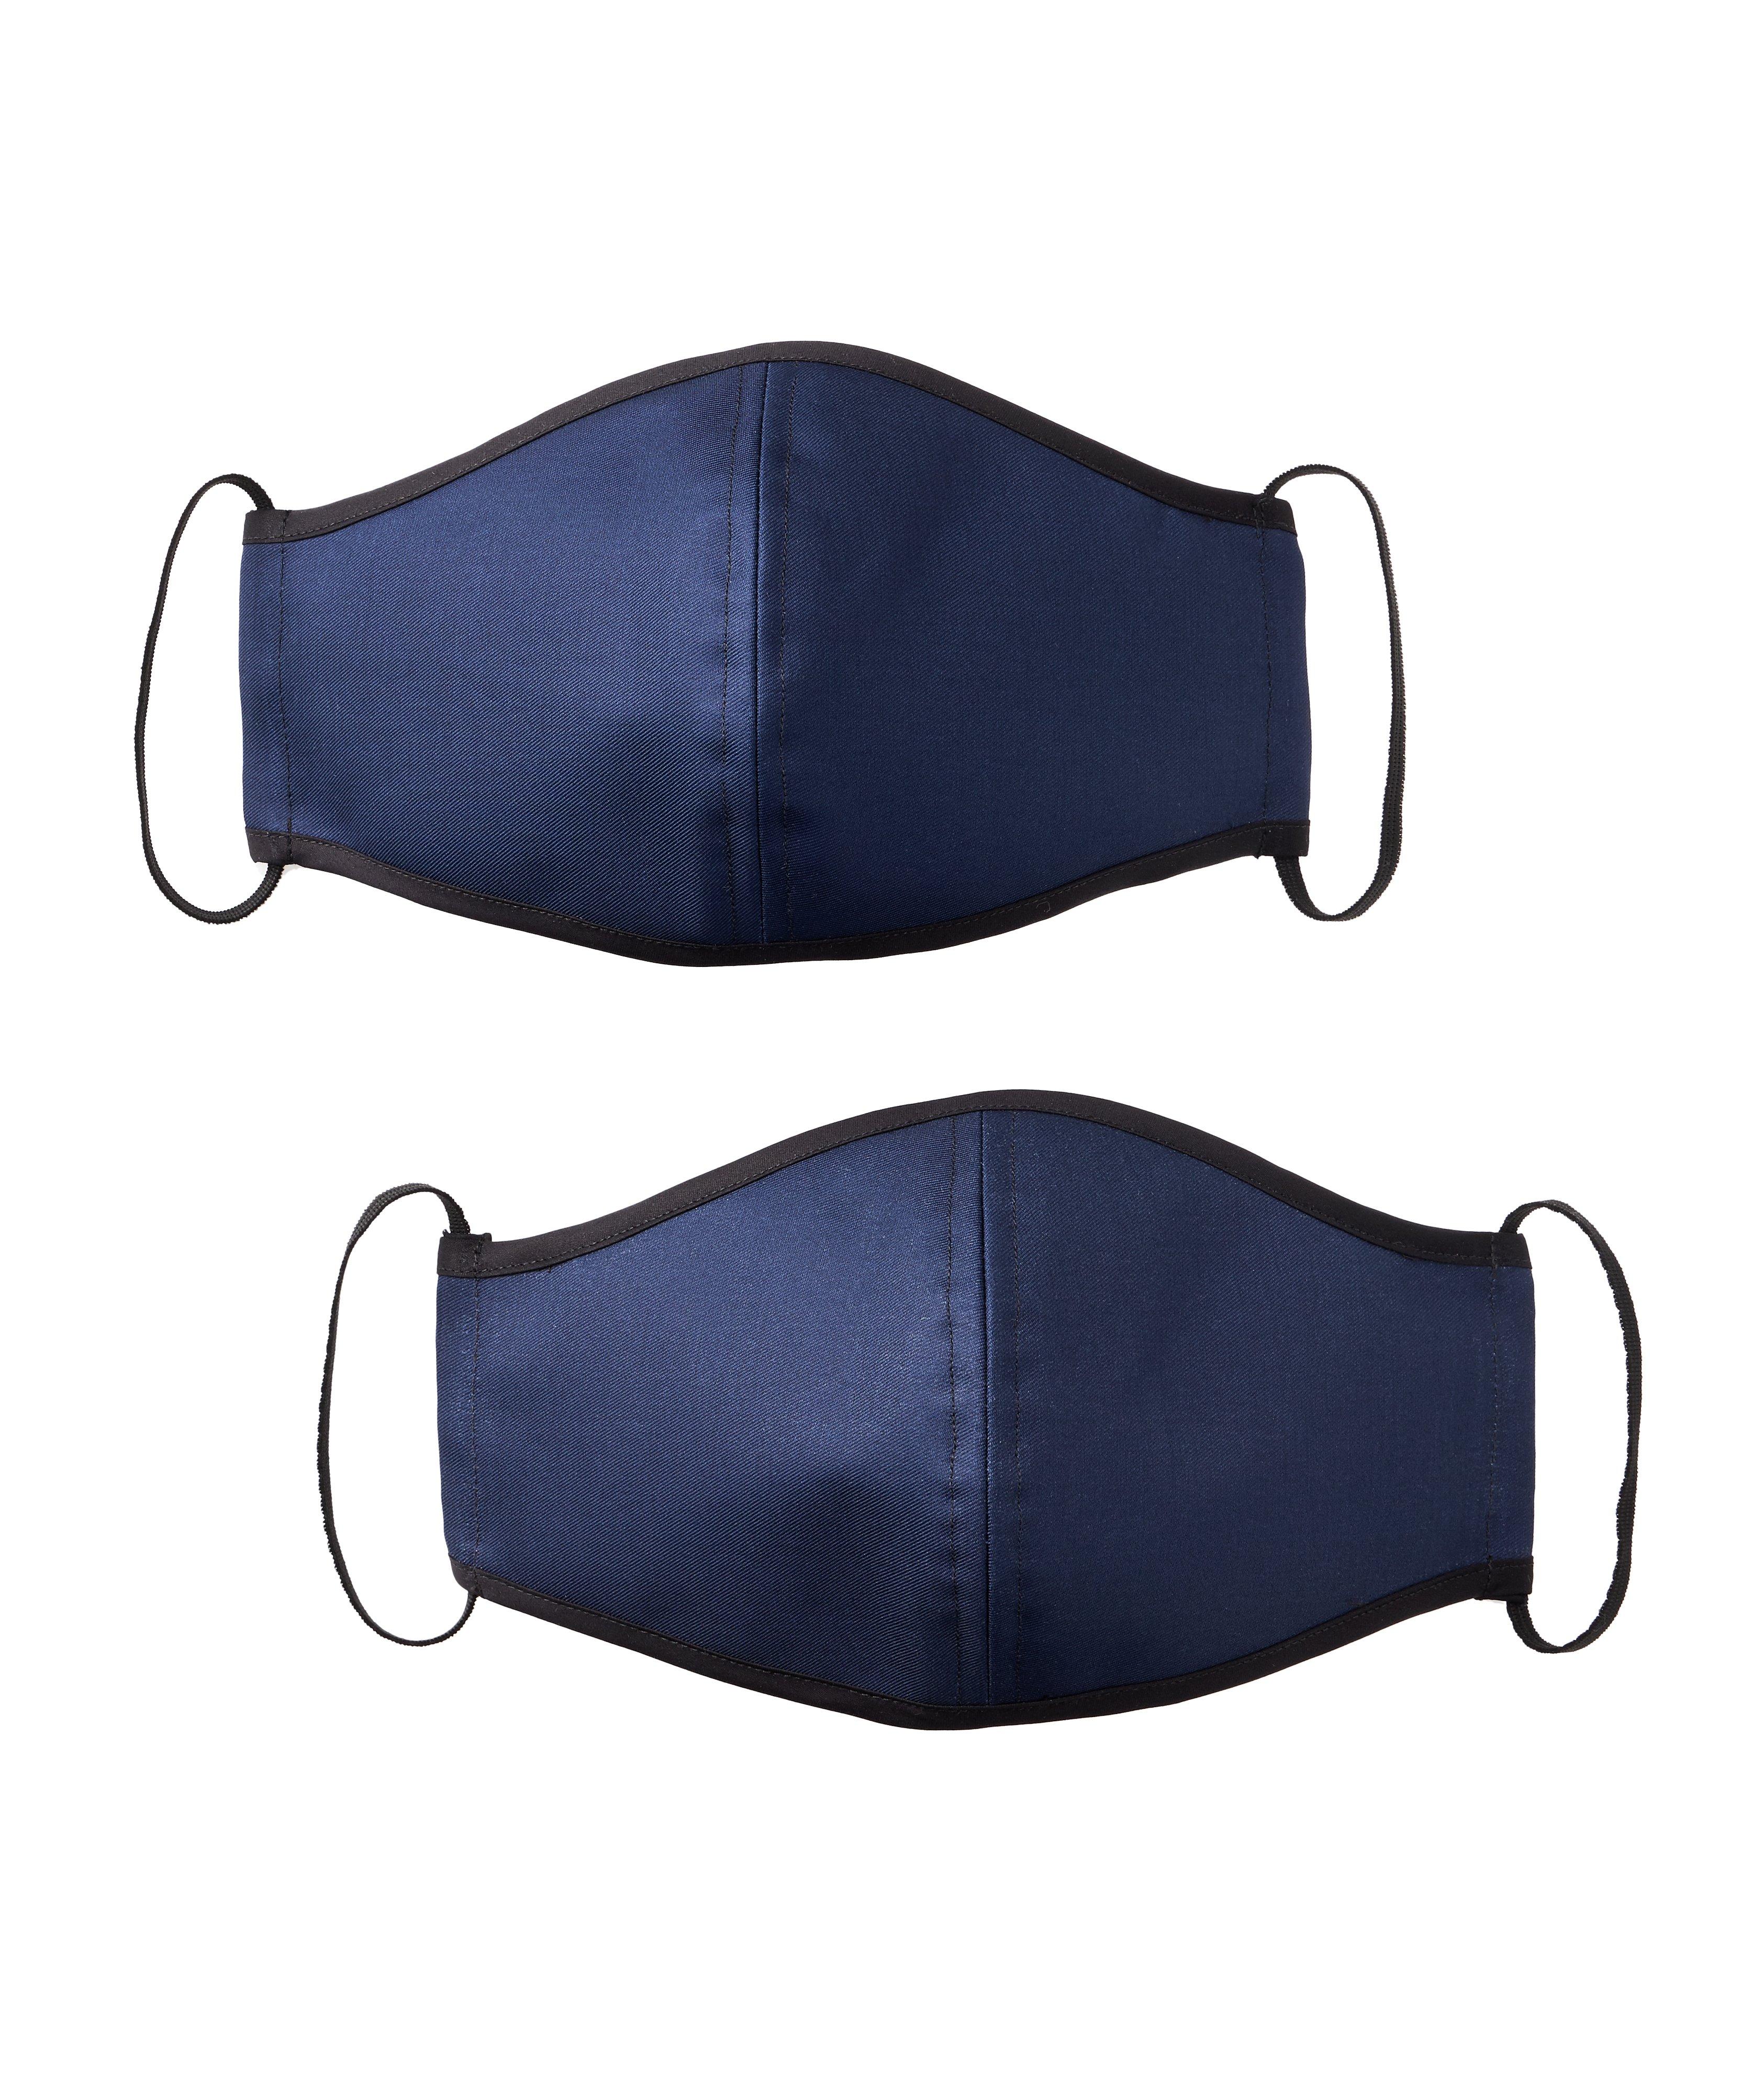 2-Pack Non-Medical Face Mask image 0